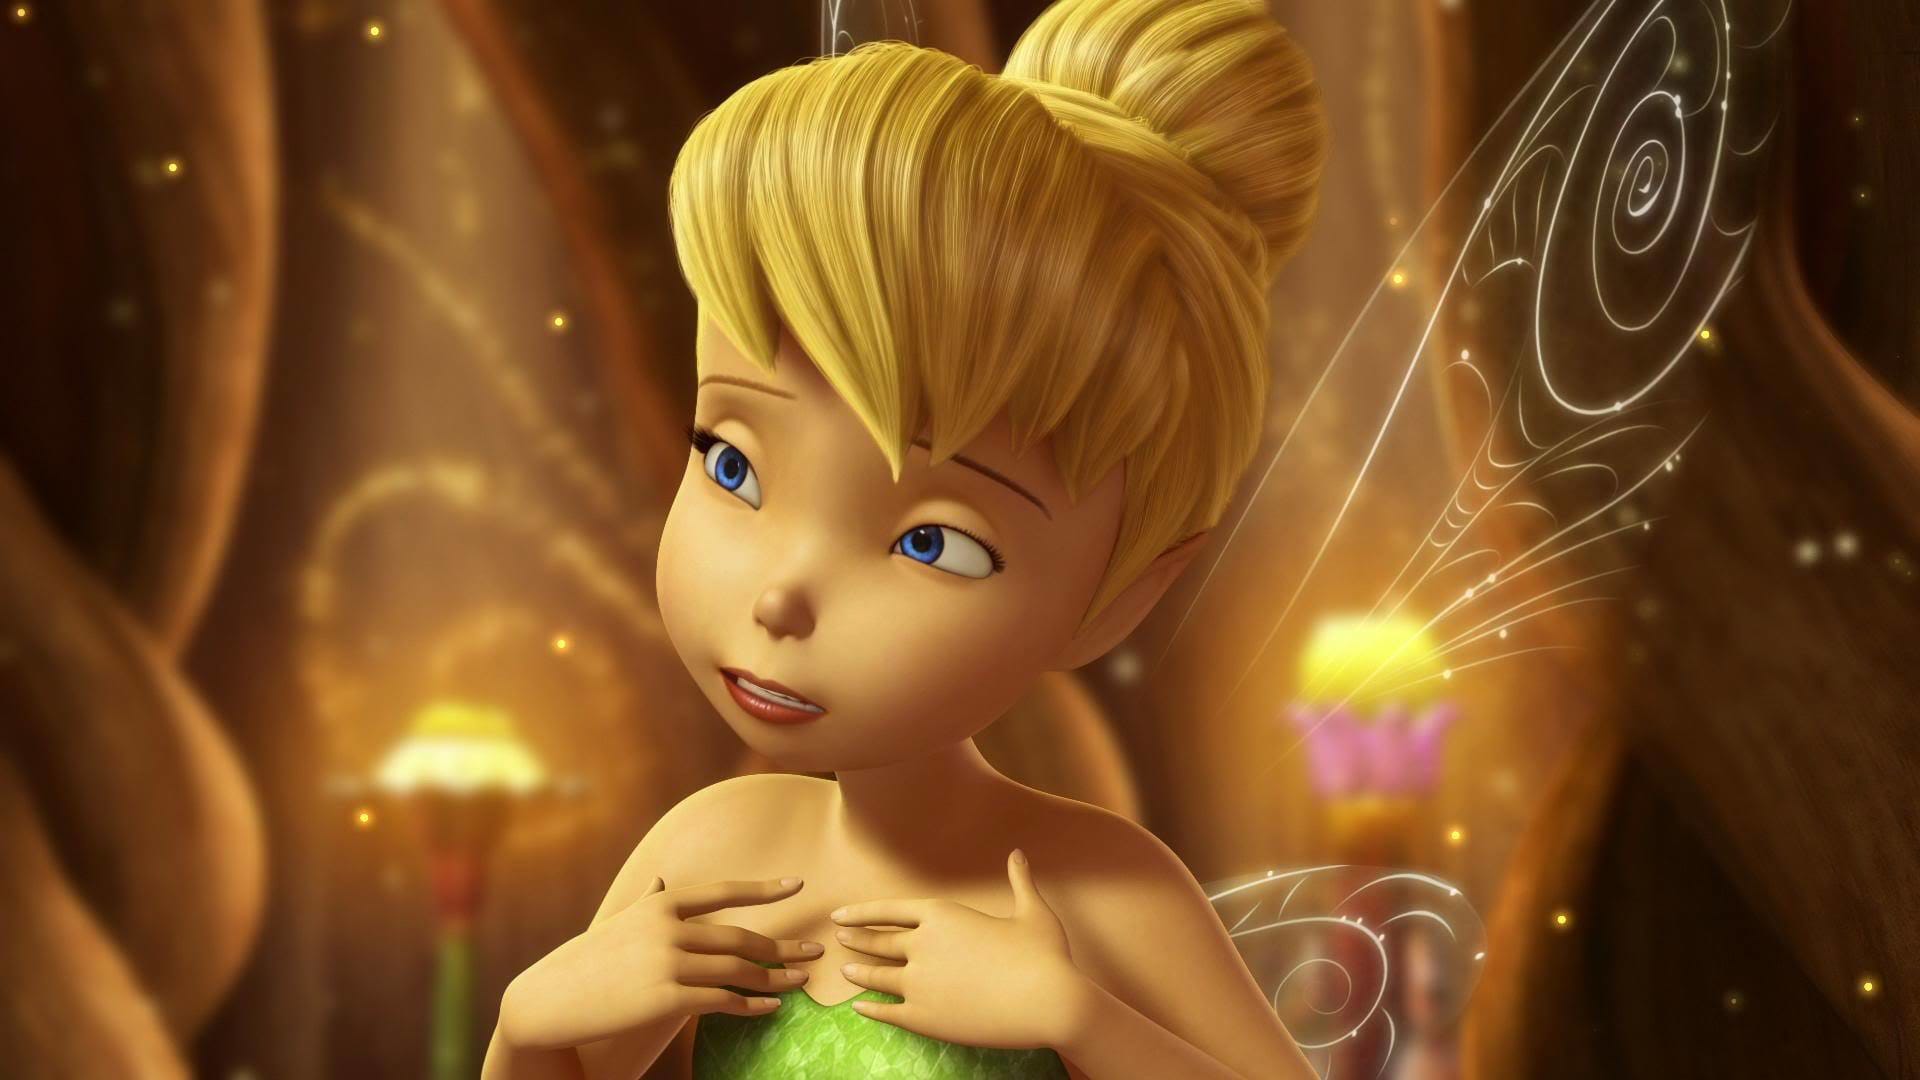 Tinker Bell And The Lost Treasure Wallpapers High Quality Do